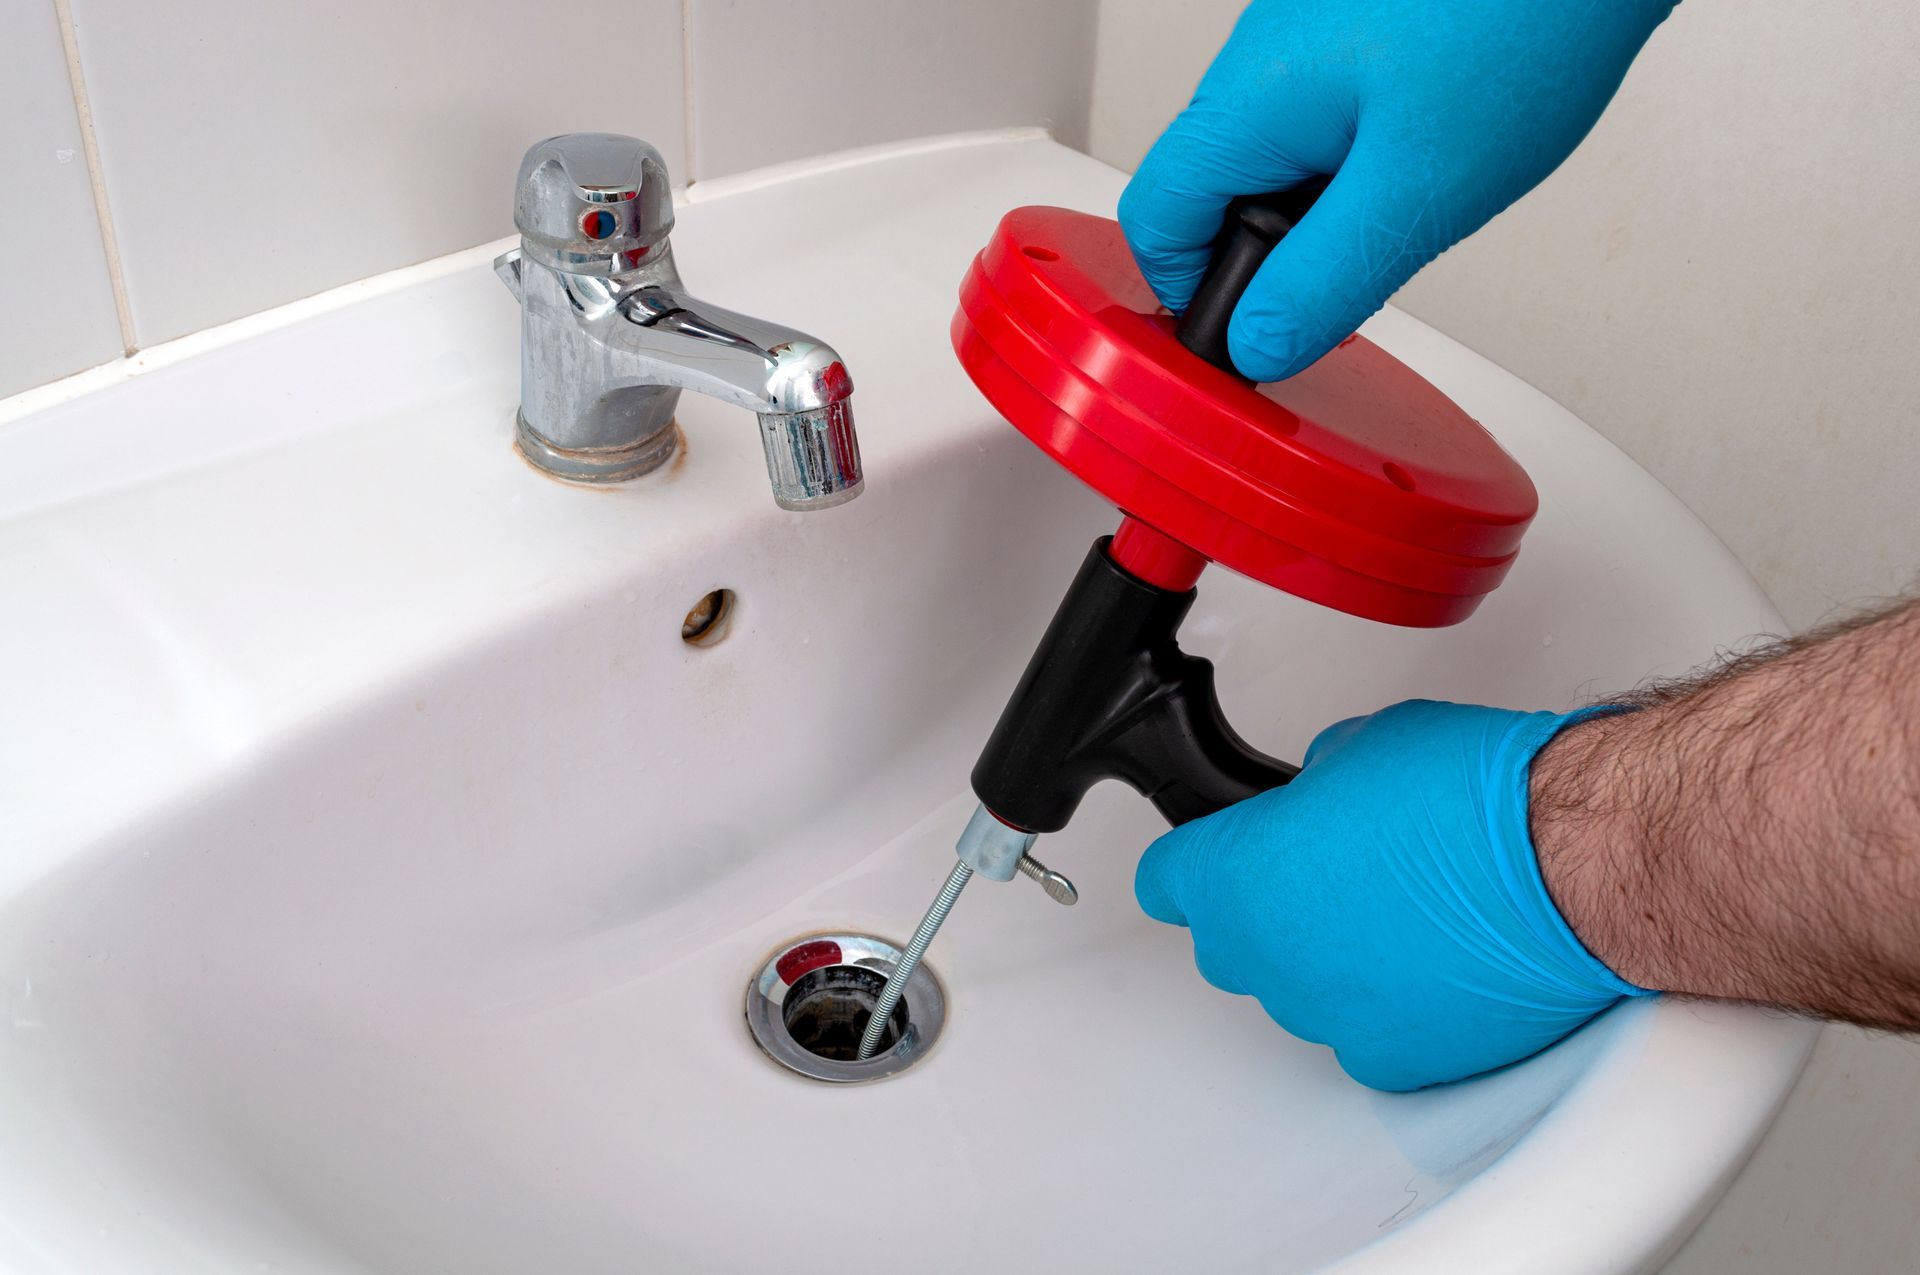 a person wearing blue gloves is using a drain cleaner on a sink